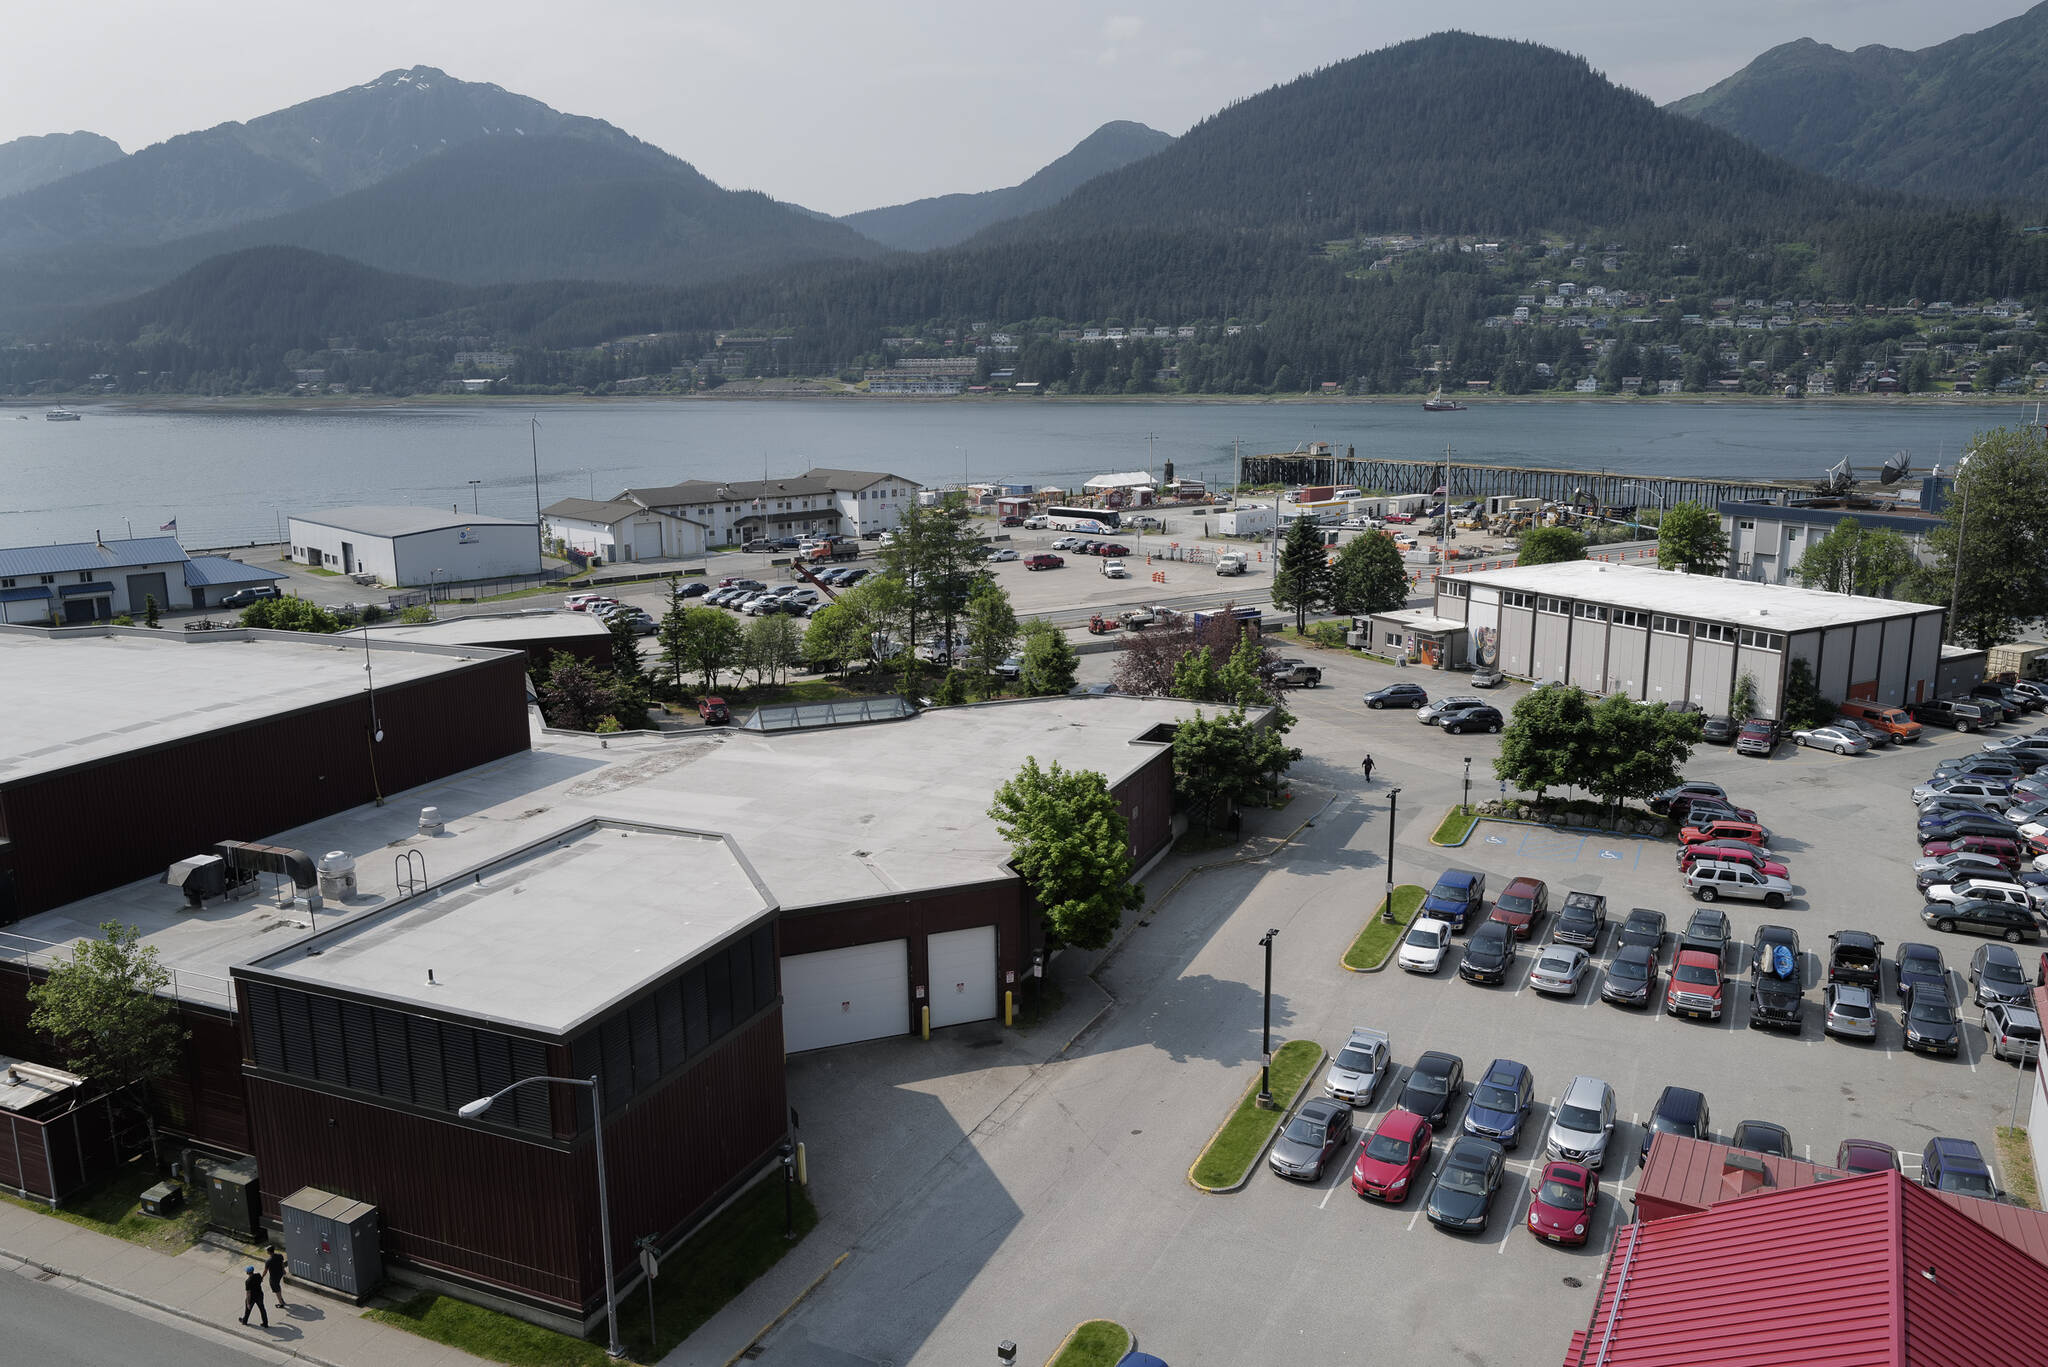 Centennial Hall, left, and the Juneau Arts and Culture Center on Tuesday, July 2, 2019. (Michael Penn / Juneau Empire File)